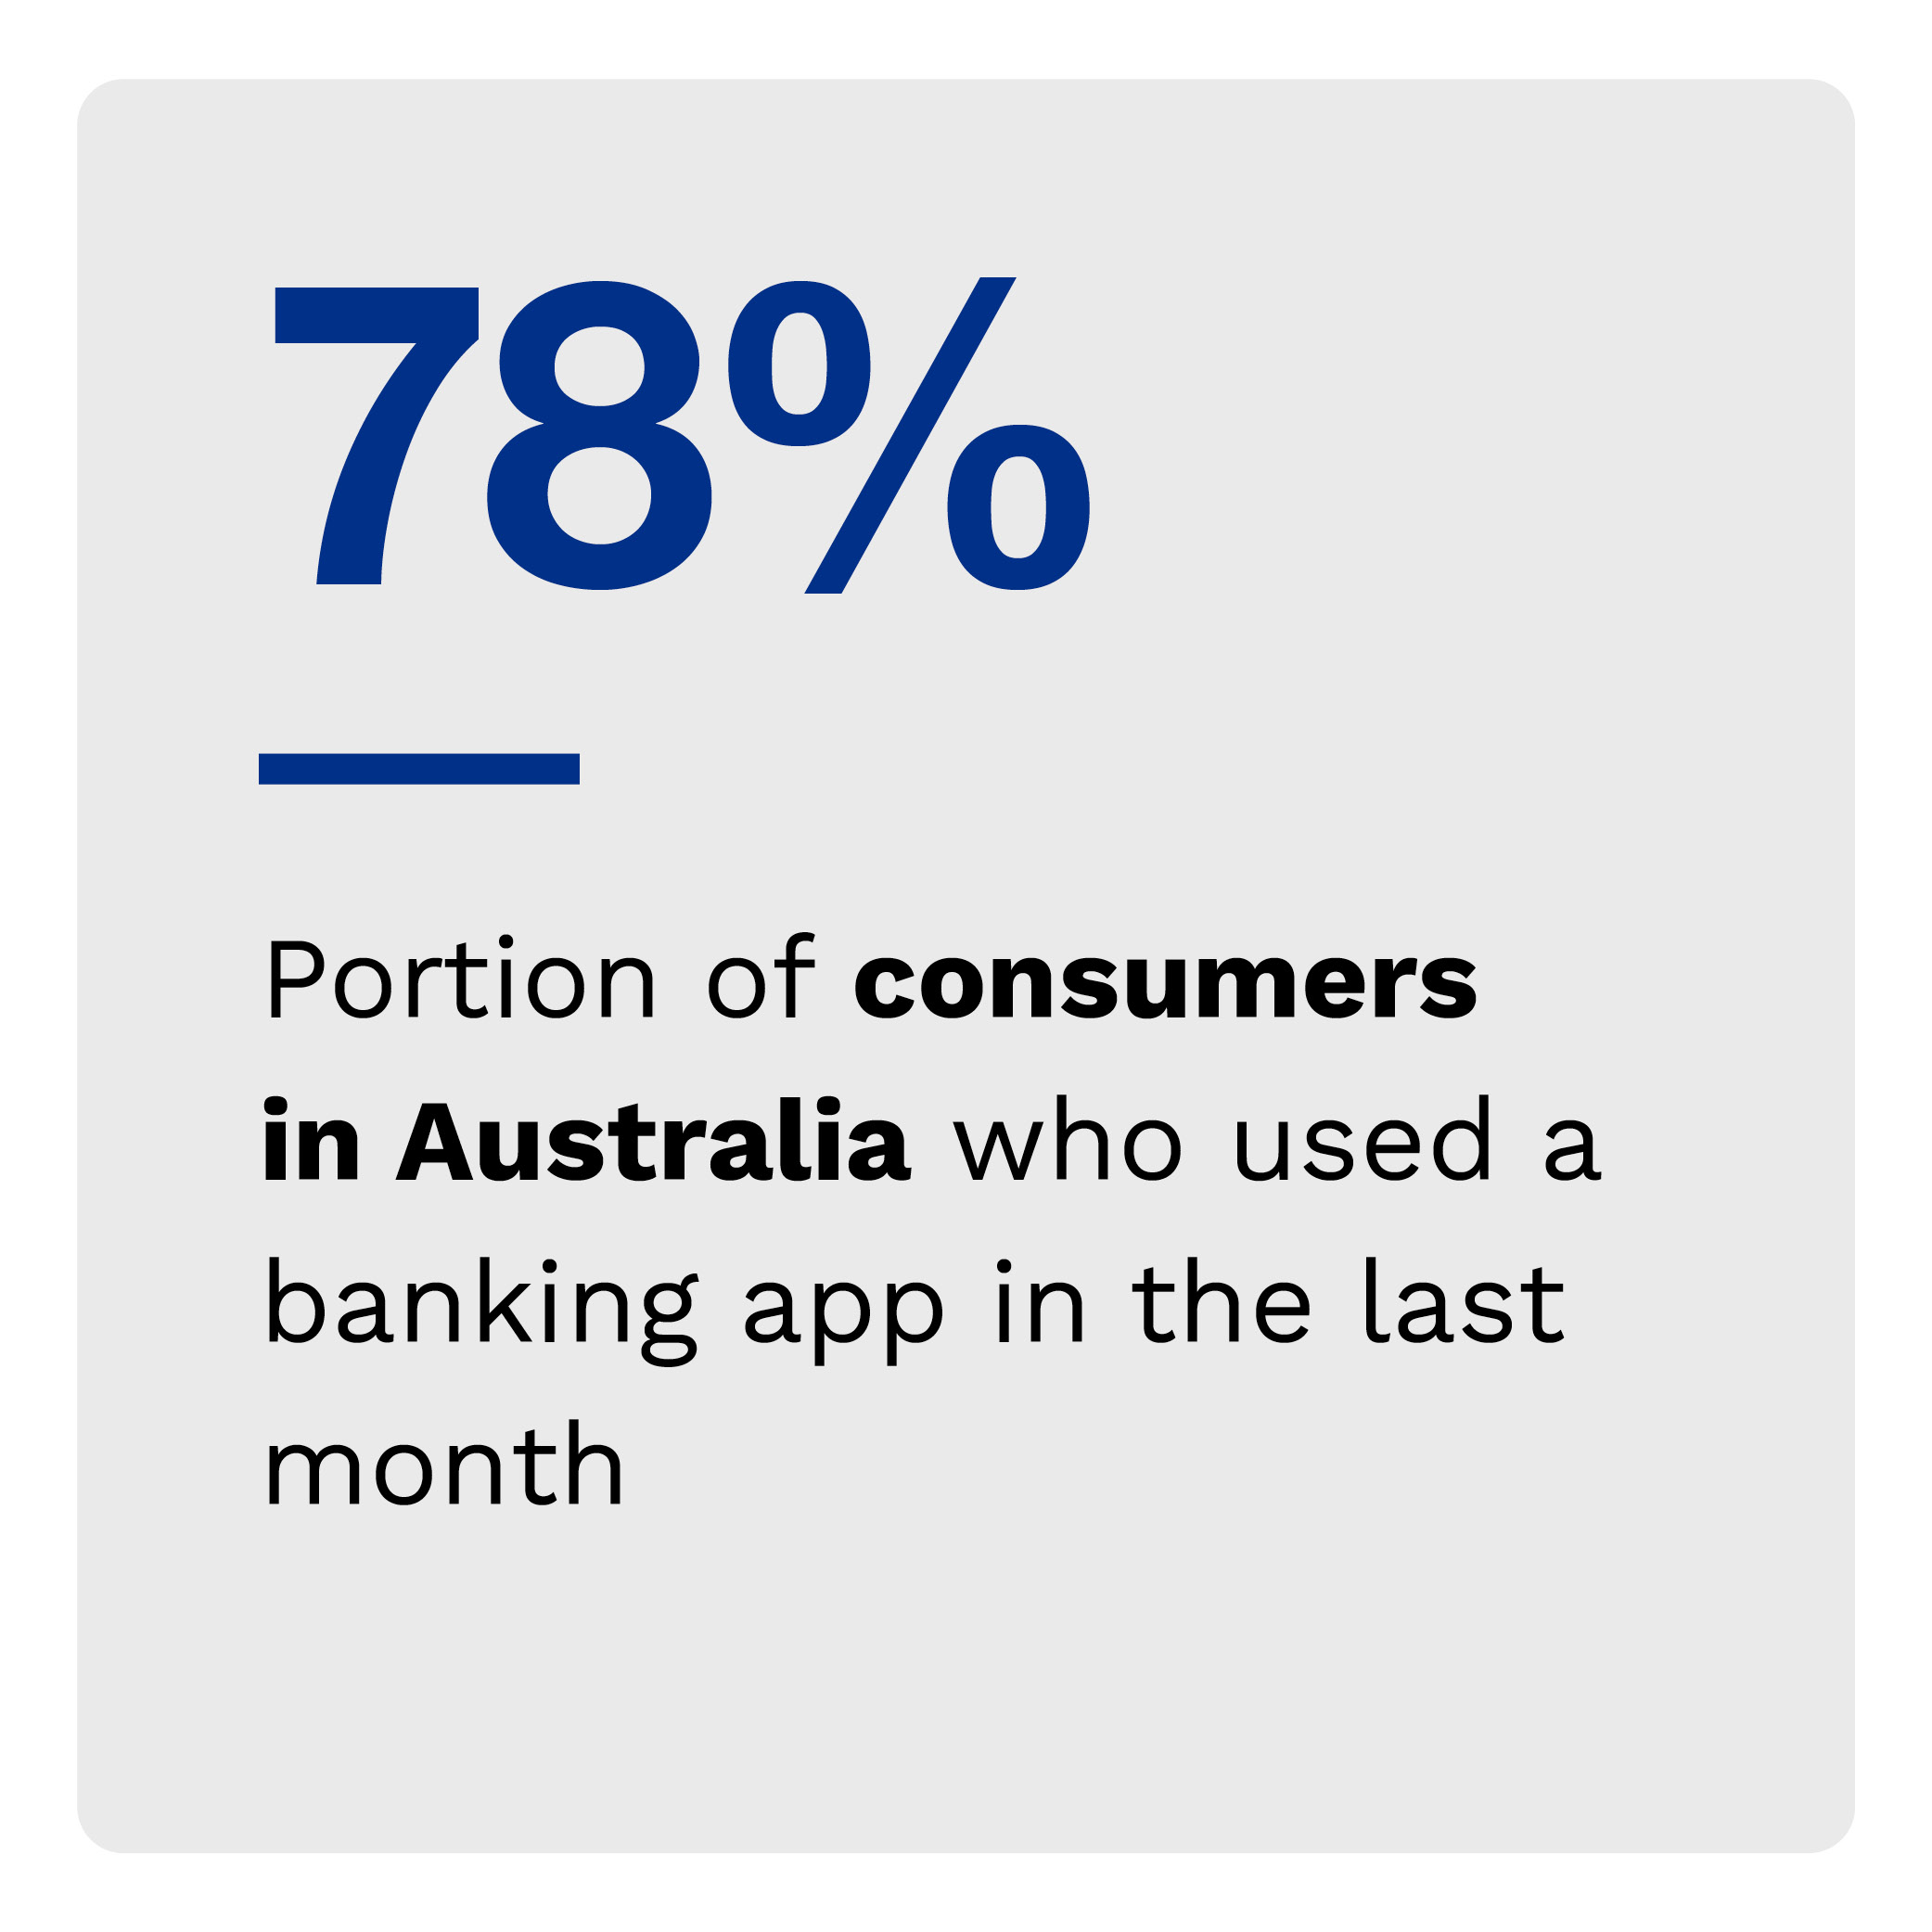 78%: Portion of consumers in Australia who used a banking app in the last month